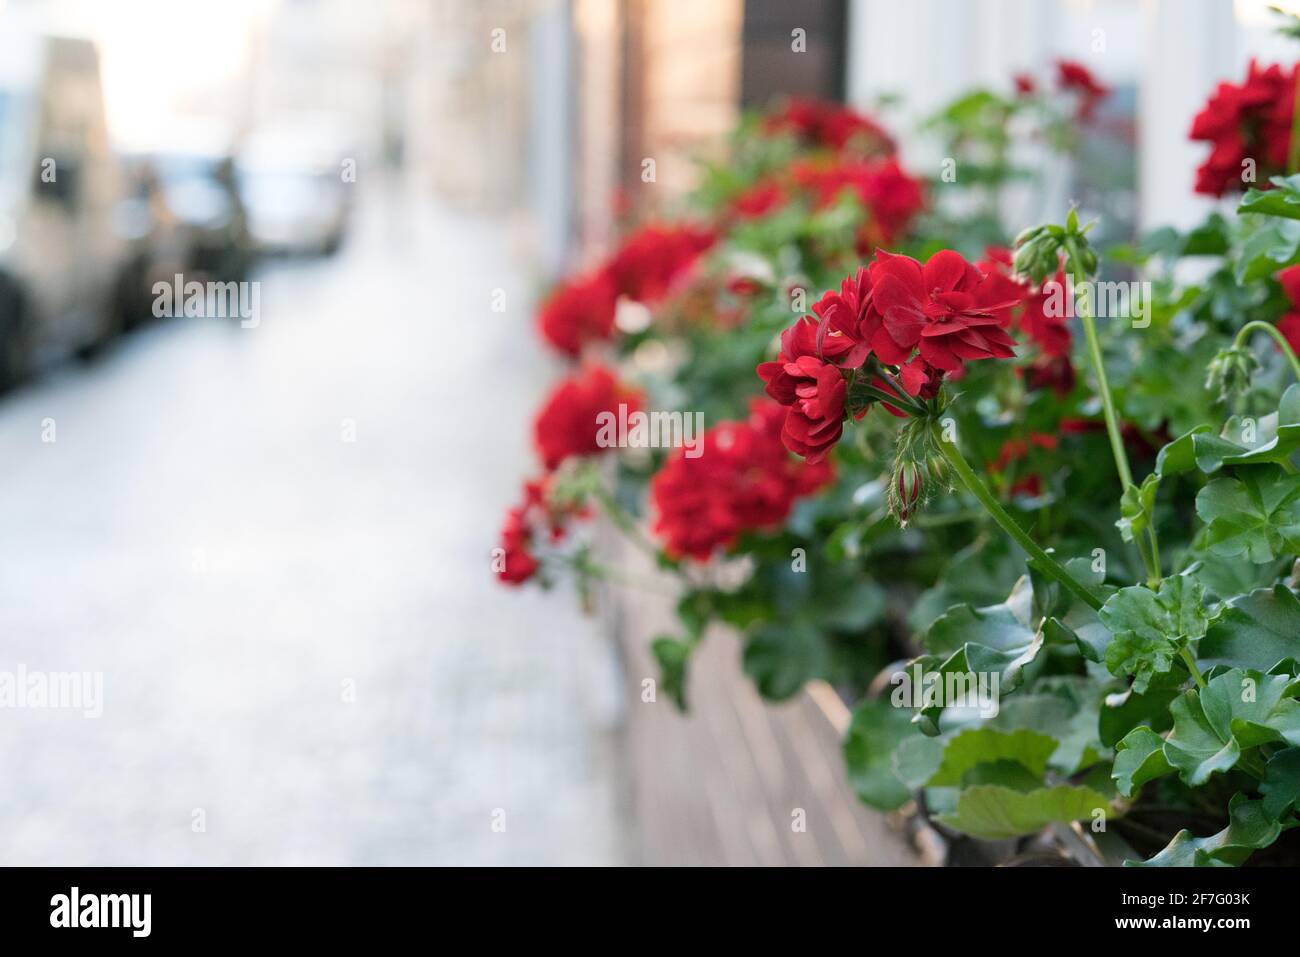 Flowers tables and chairs of an outdoor cafe in europe Stock Photo